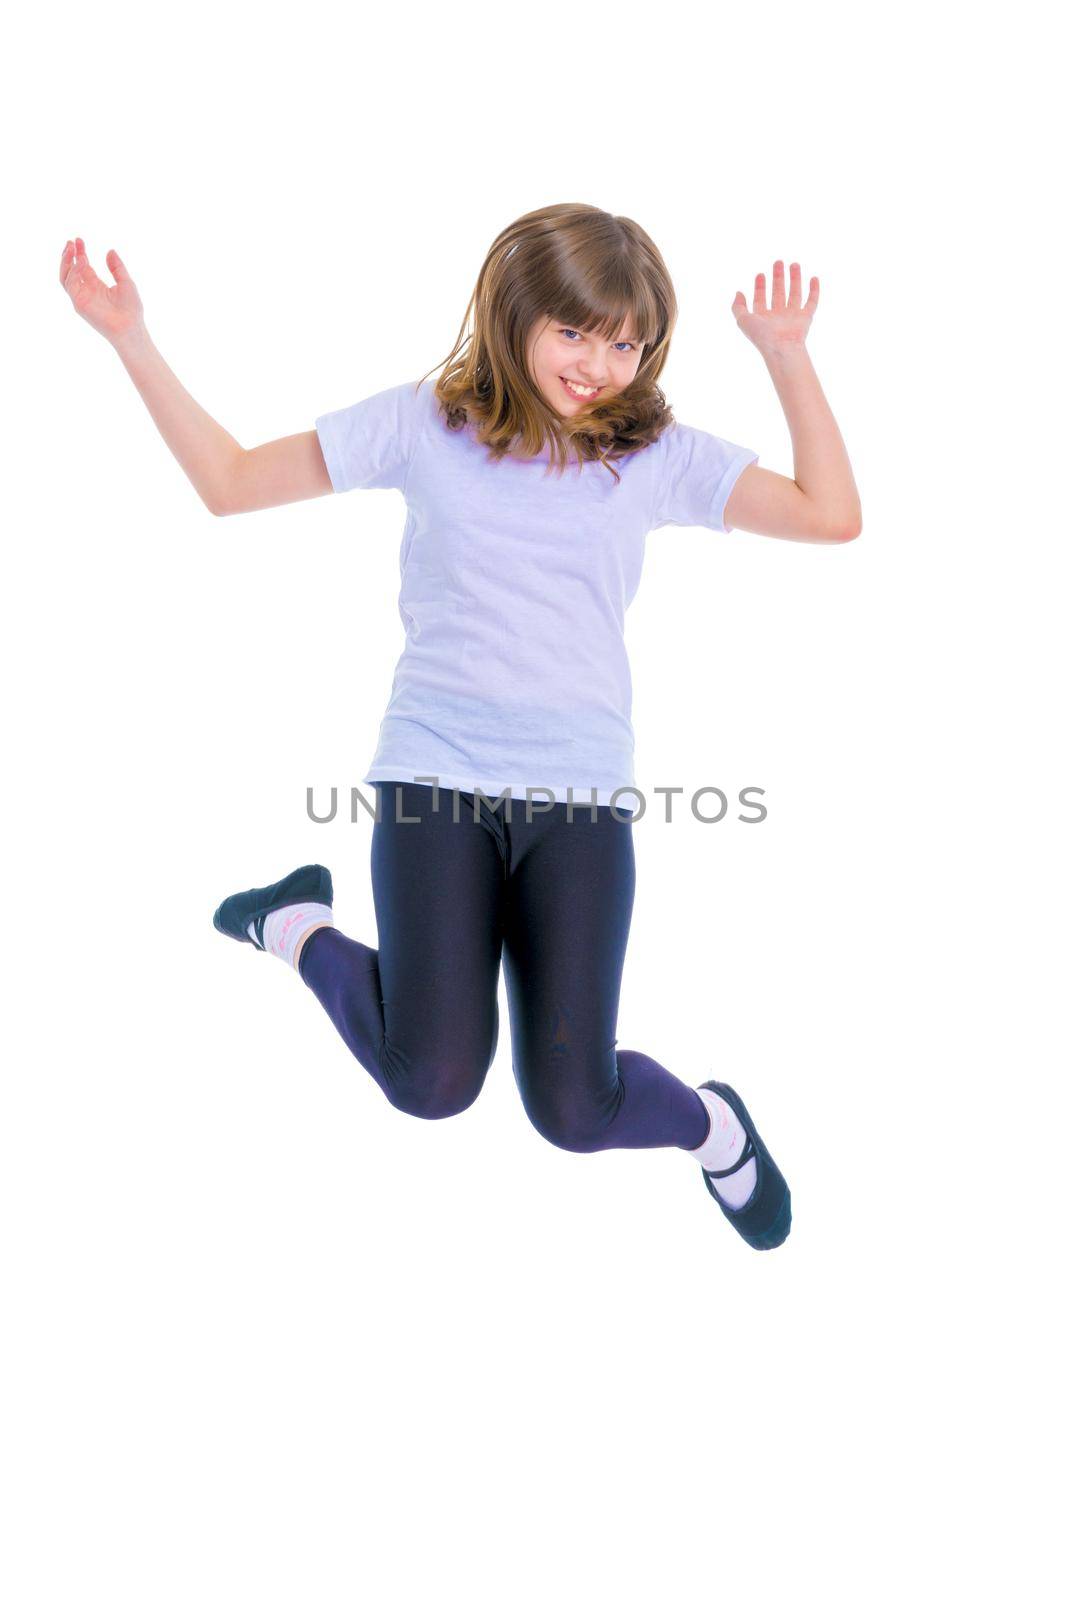 A teenage girl jumps and wags her arms. The concept of a holiday. Isolated on white background